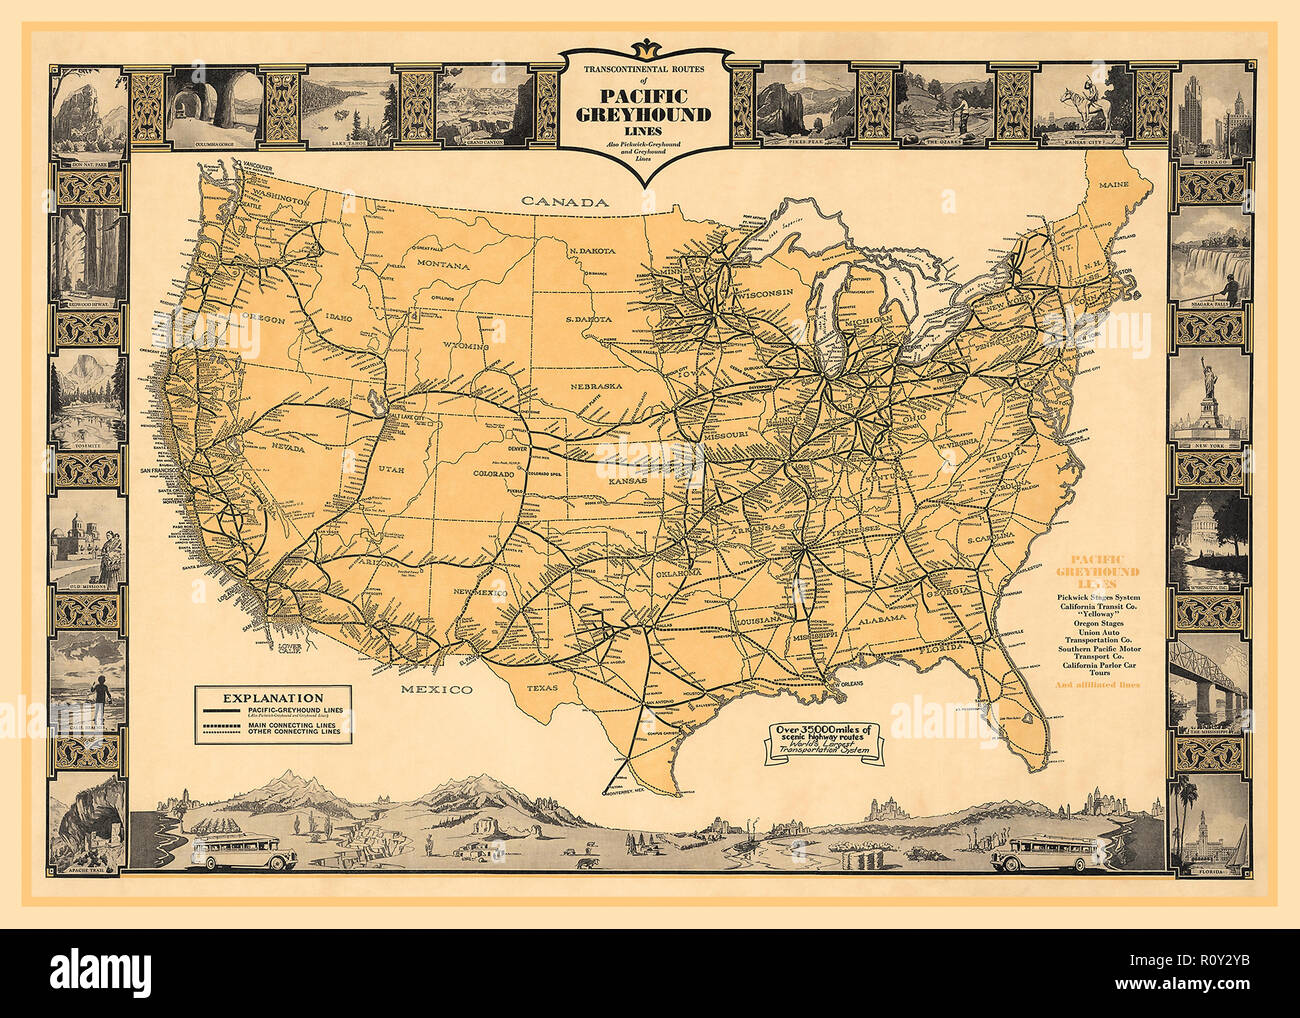 Vintage historic USA map of American Pacific Greyhound Bus Transport Route, 1930 USA Stock Photo